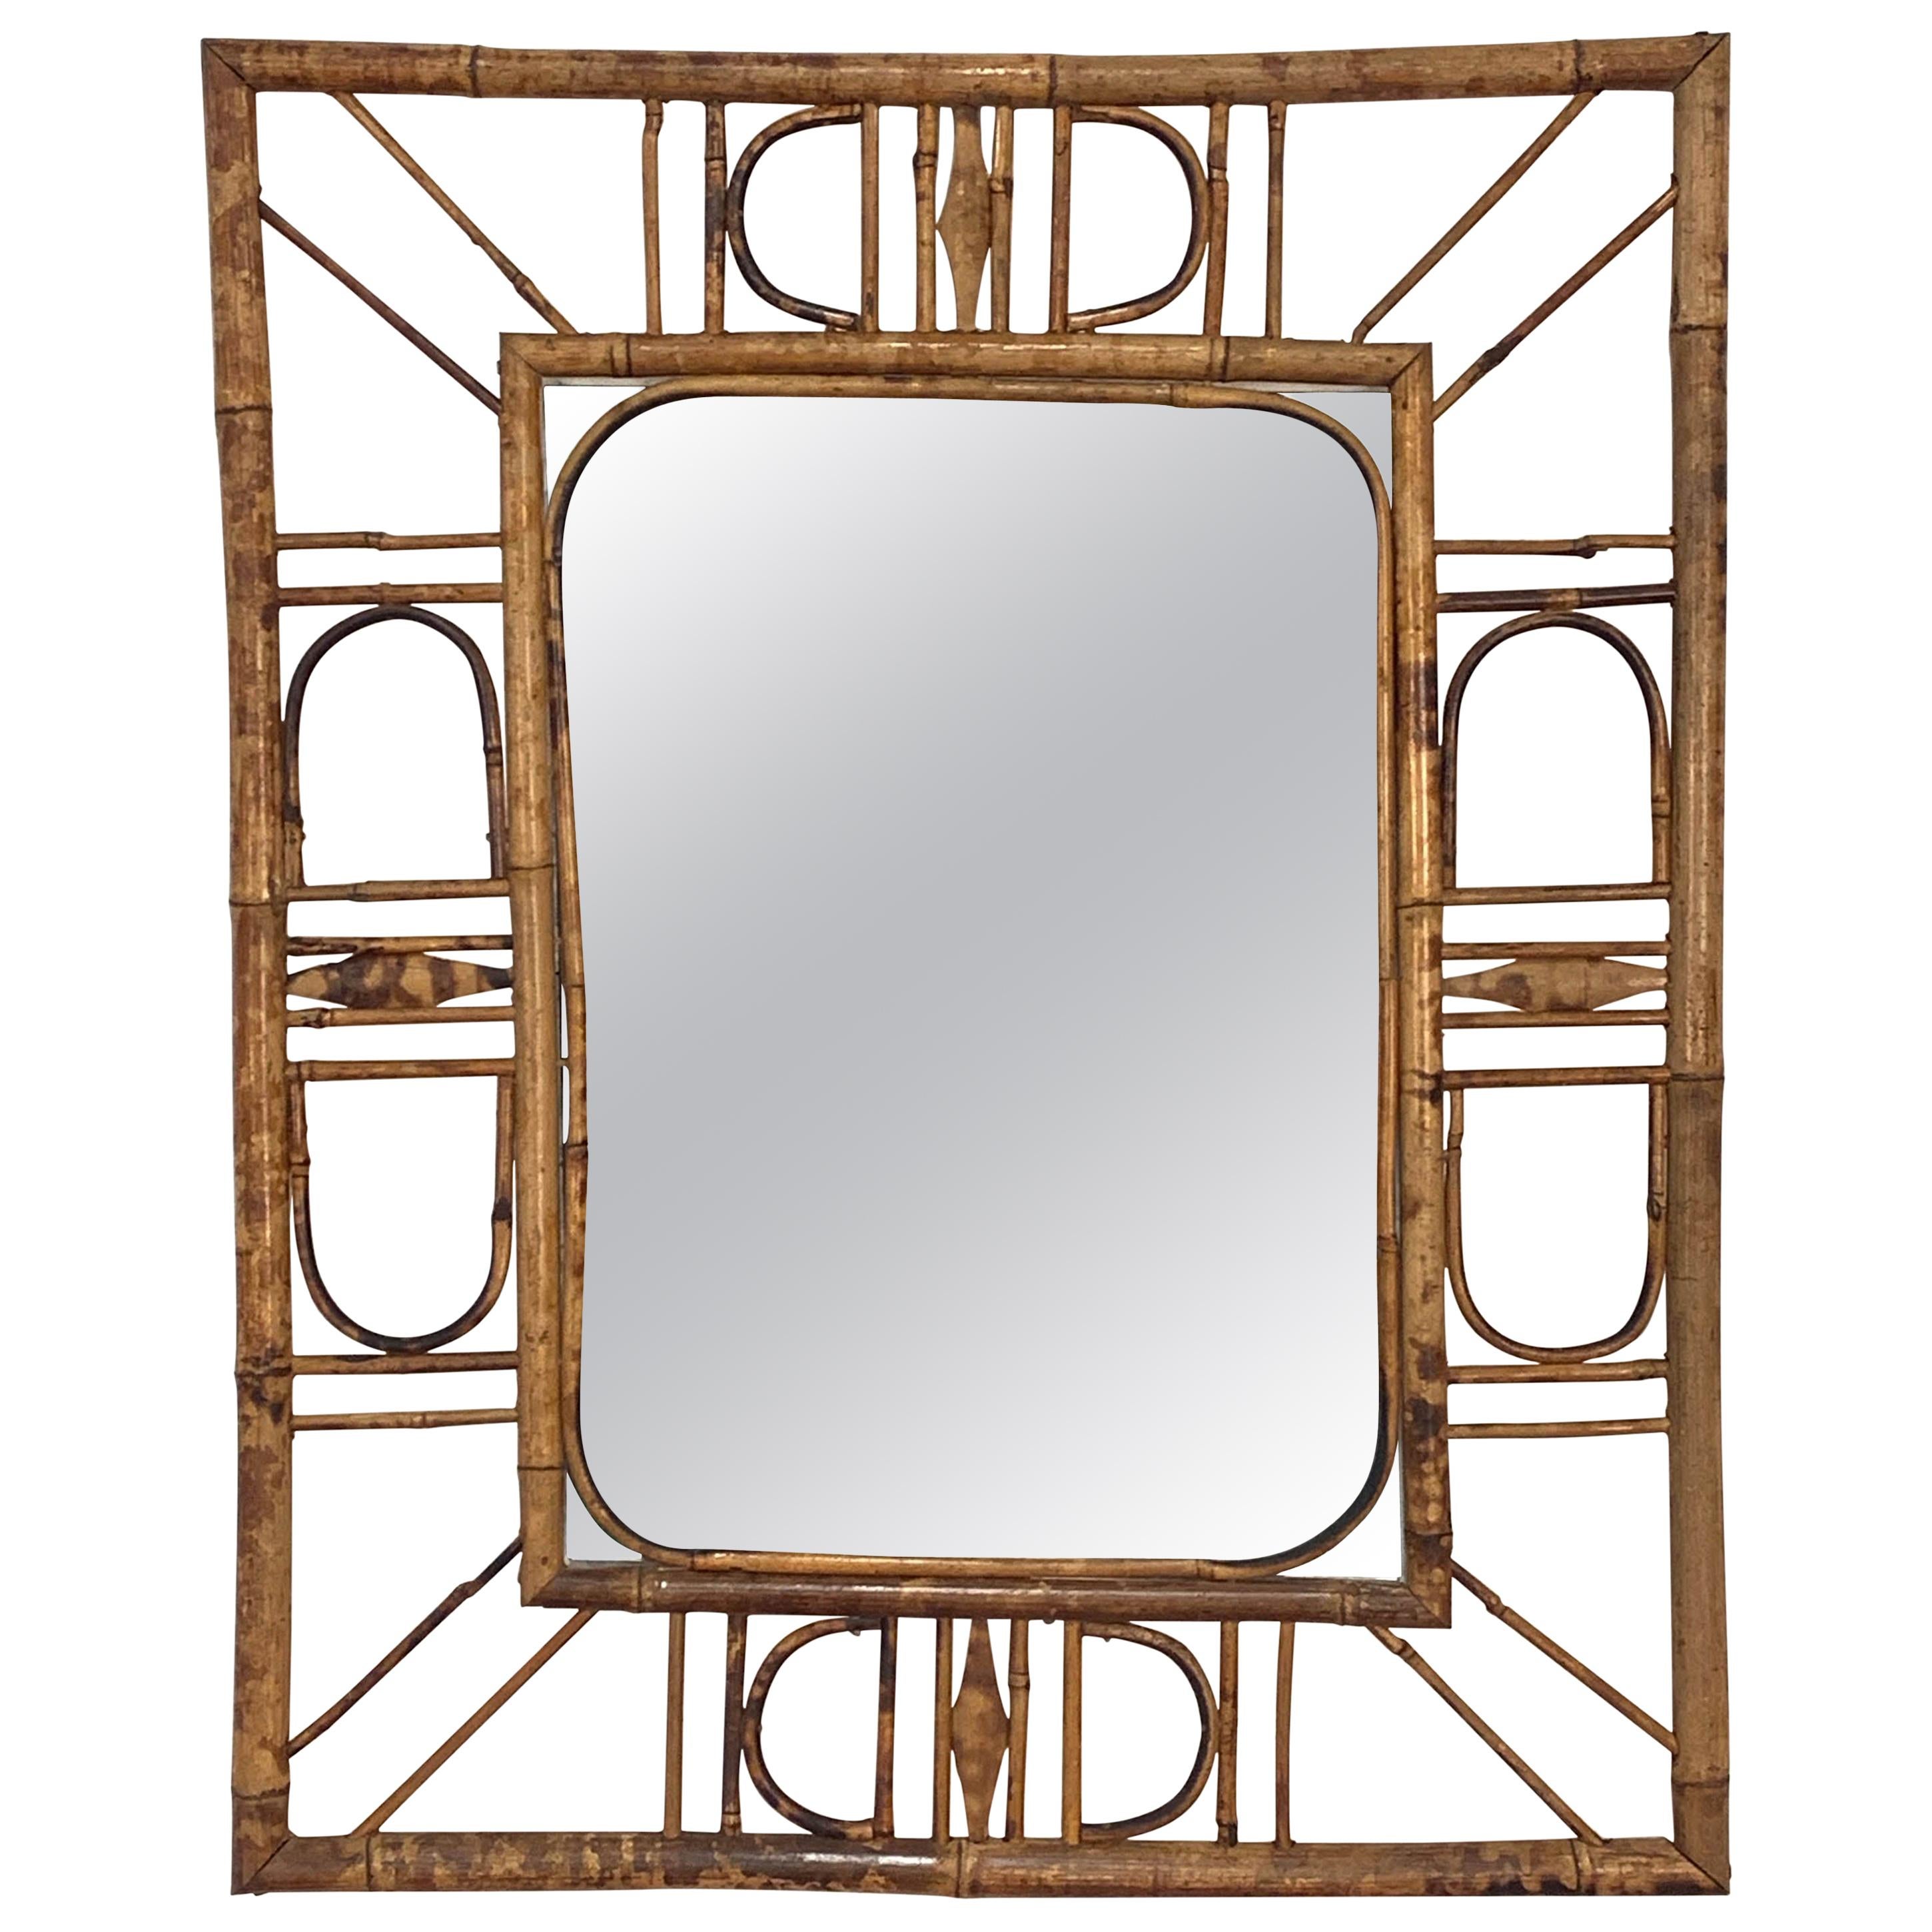 Midcentury French Riviera Bamboo and Rattan Wall Mirror, 1960s